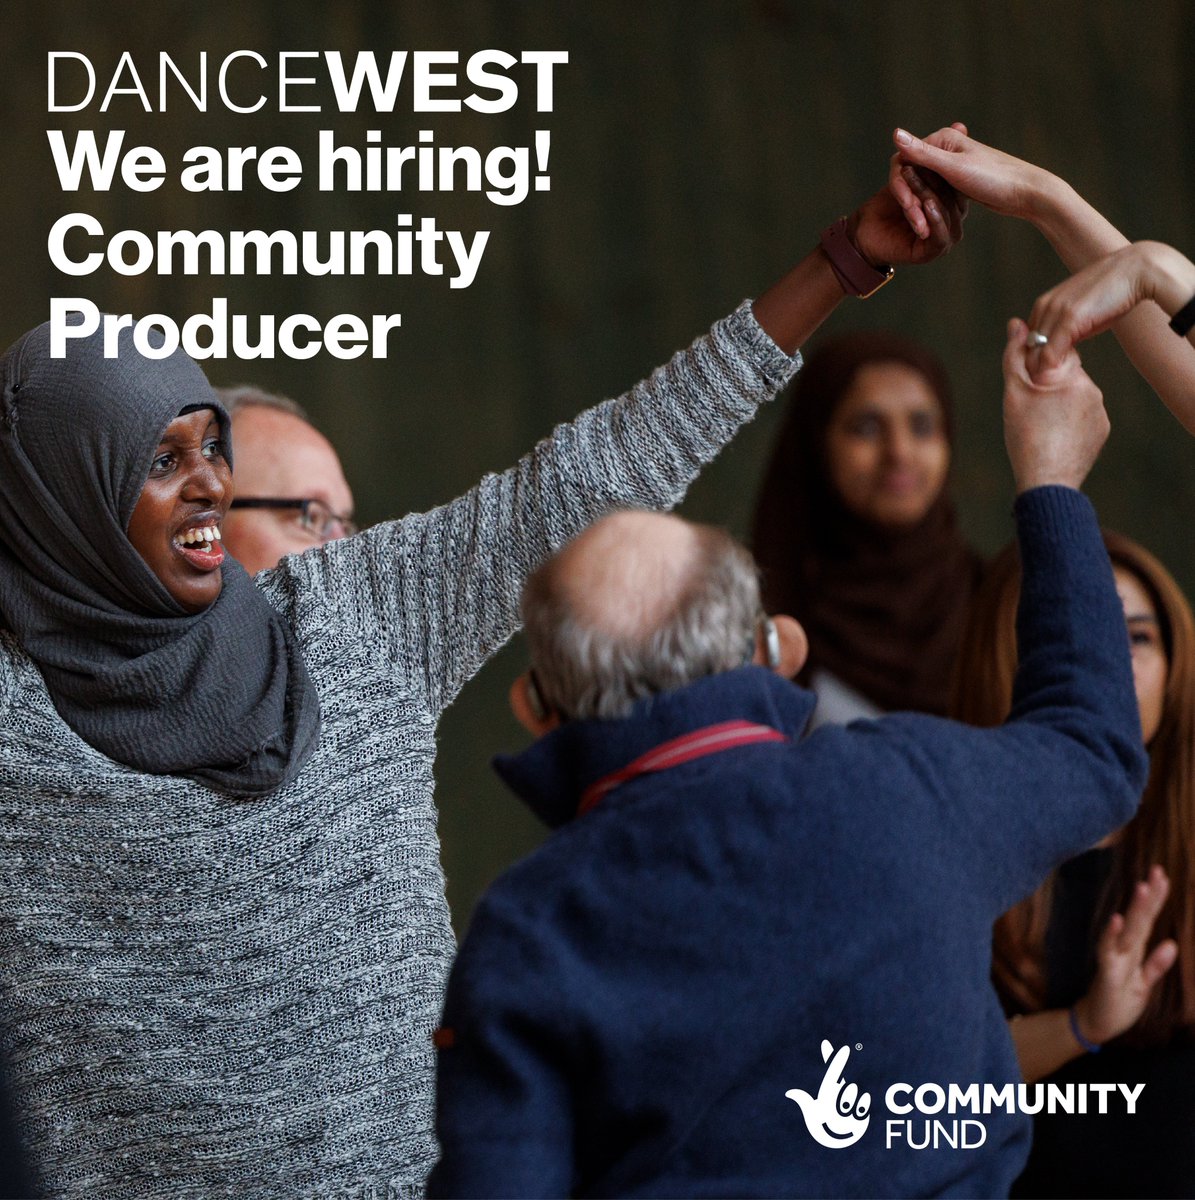 COMMUNITY PRODUCER: Full-time £31,000-£34,000. The Community Producer is responsible for the management, development, monitoring of the DanceWest programme. Supported by @LottoGoodCauses Info & pack here: dancewest.co.uk/workwithus Please RT! #DanceWest